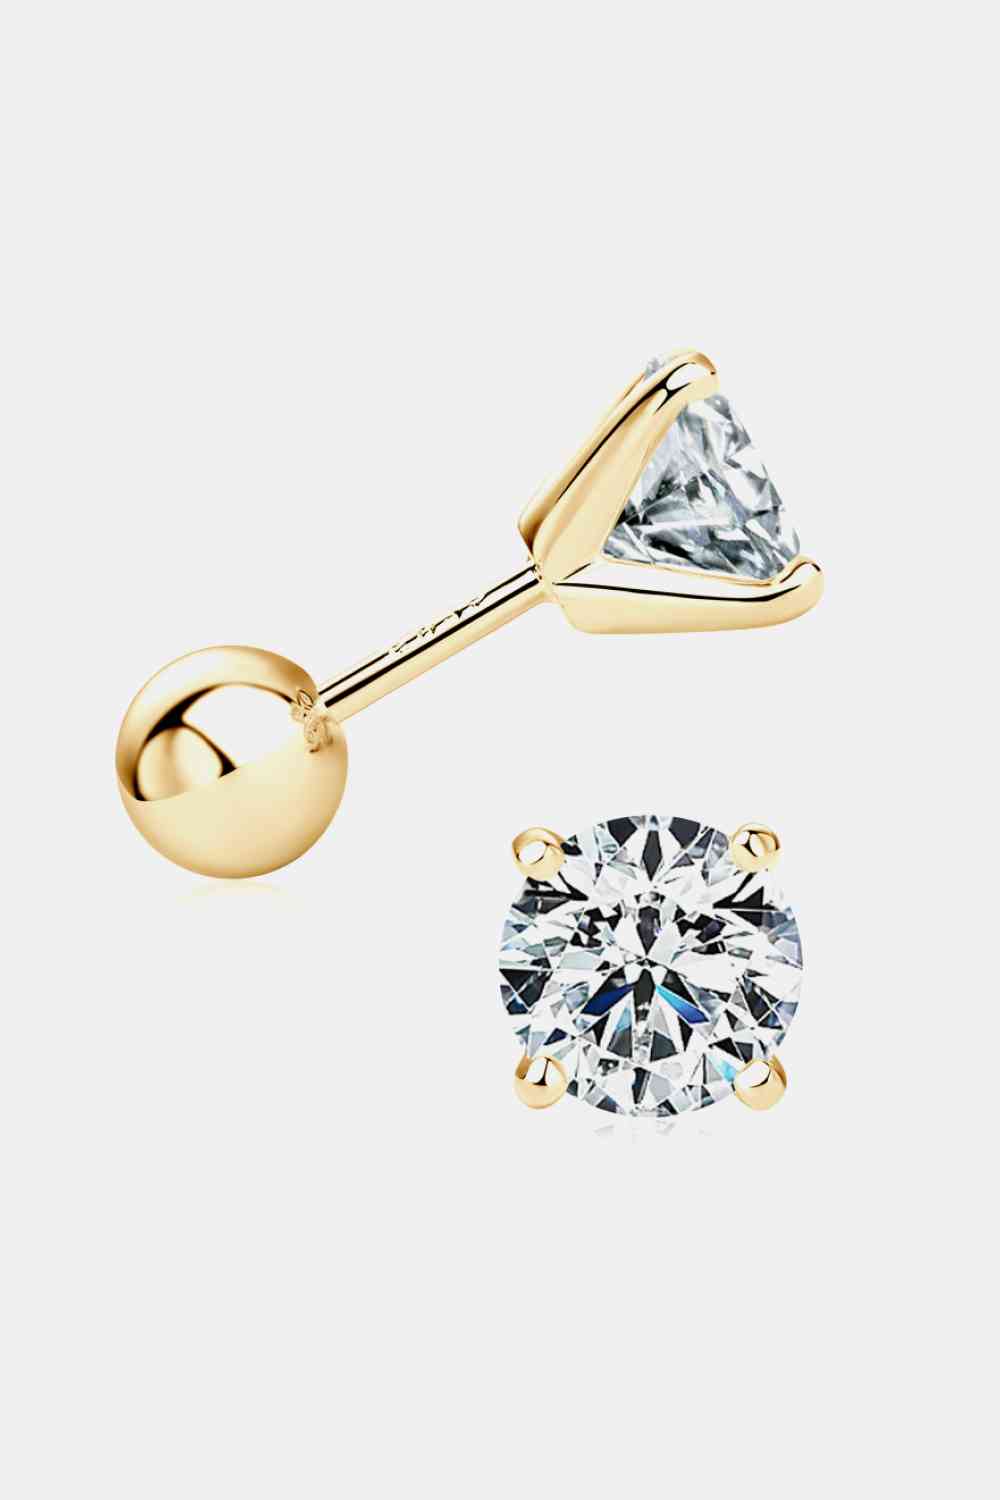 2 Carat Moissanite 925 Sterling Silver Stud Earrings Gold One Size